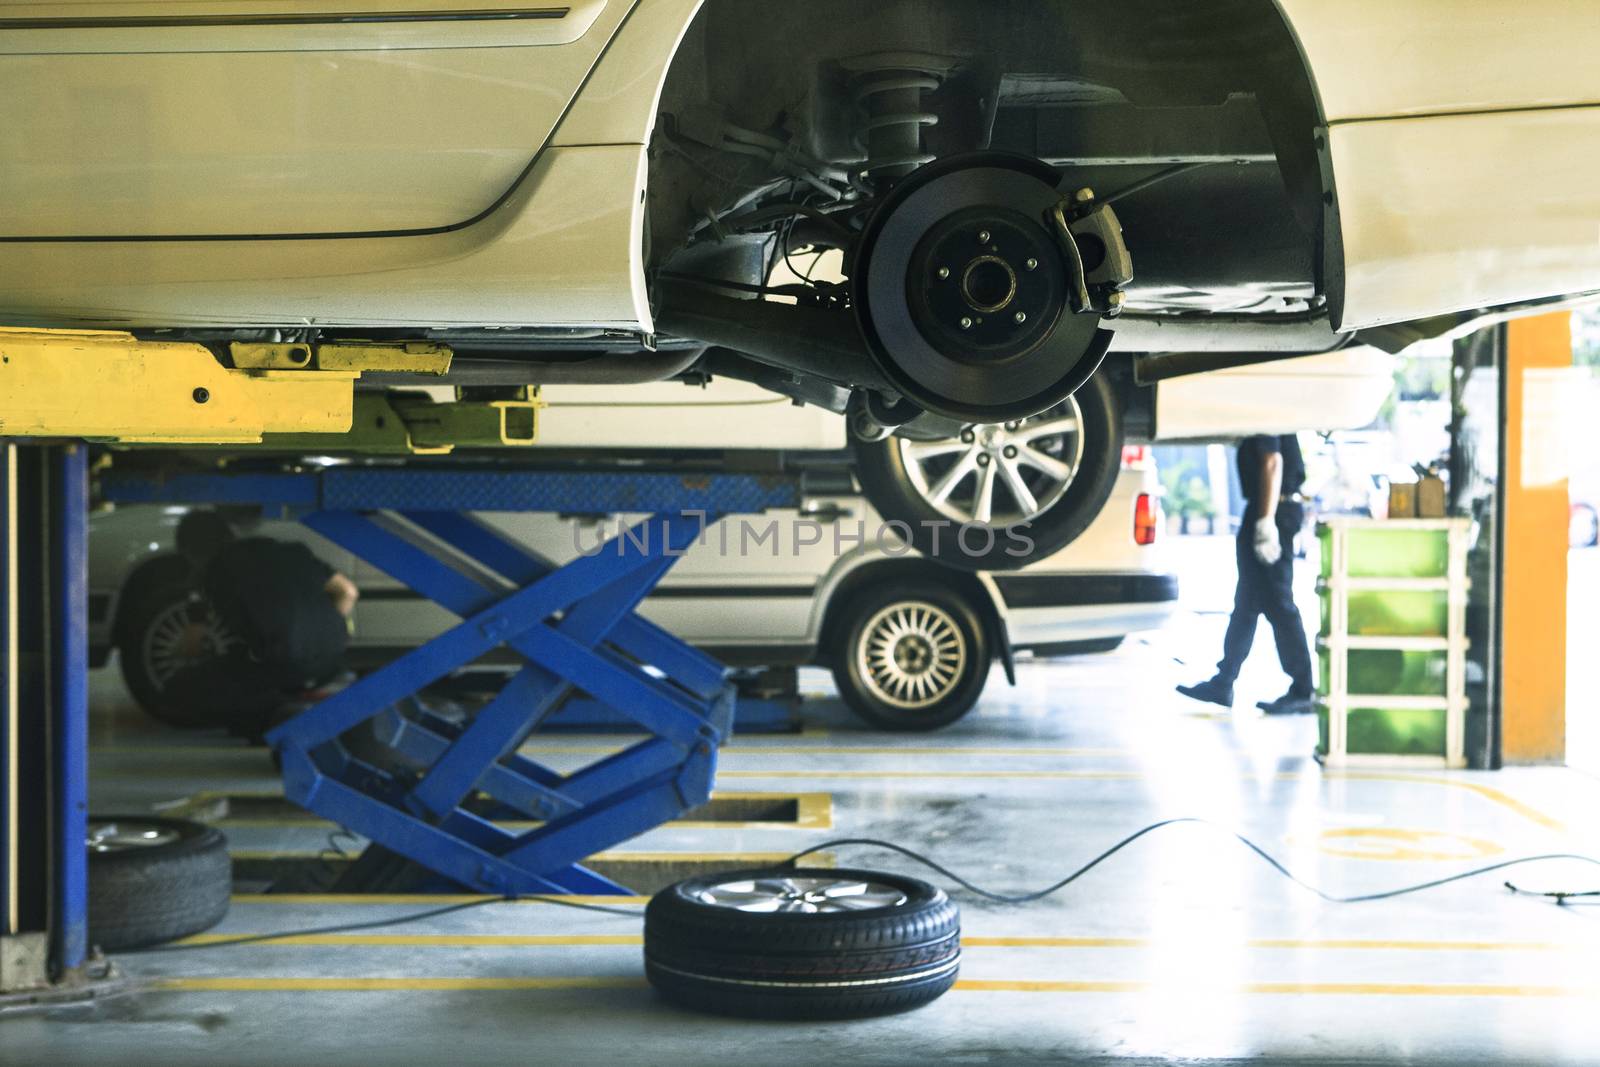  car wheel  suspension and brake system maintenance in auto service before long journey